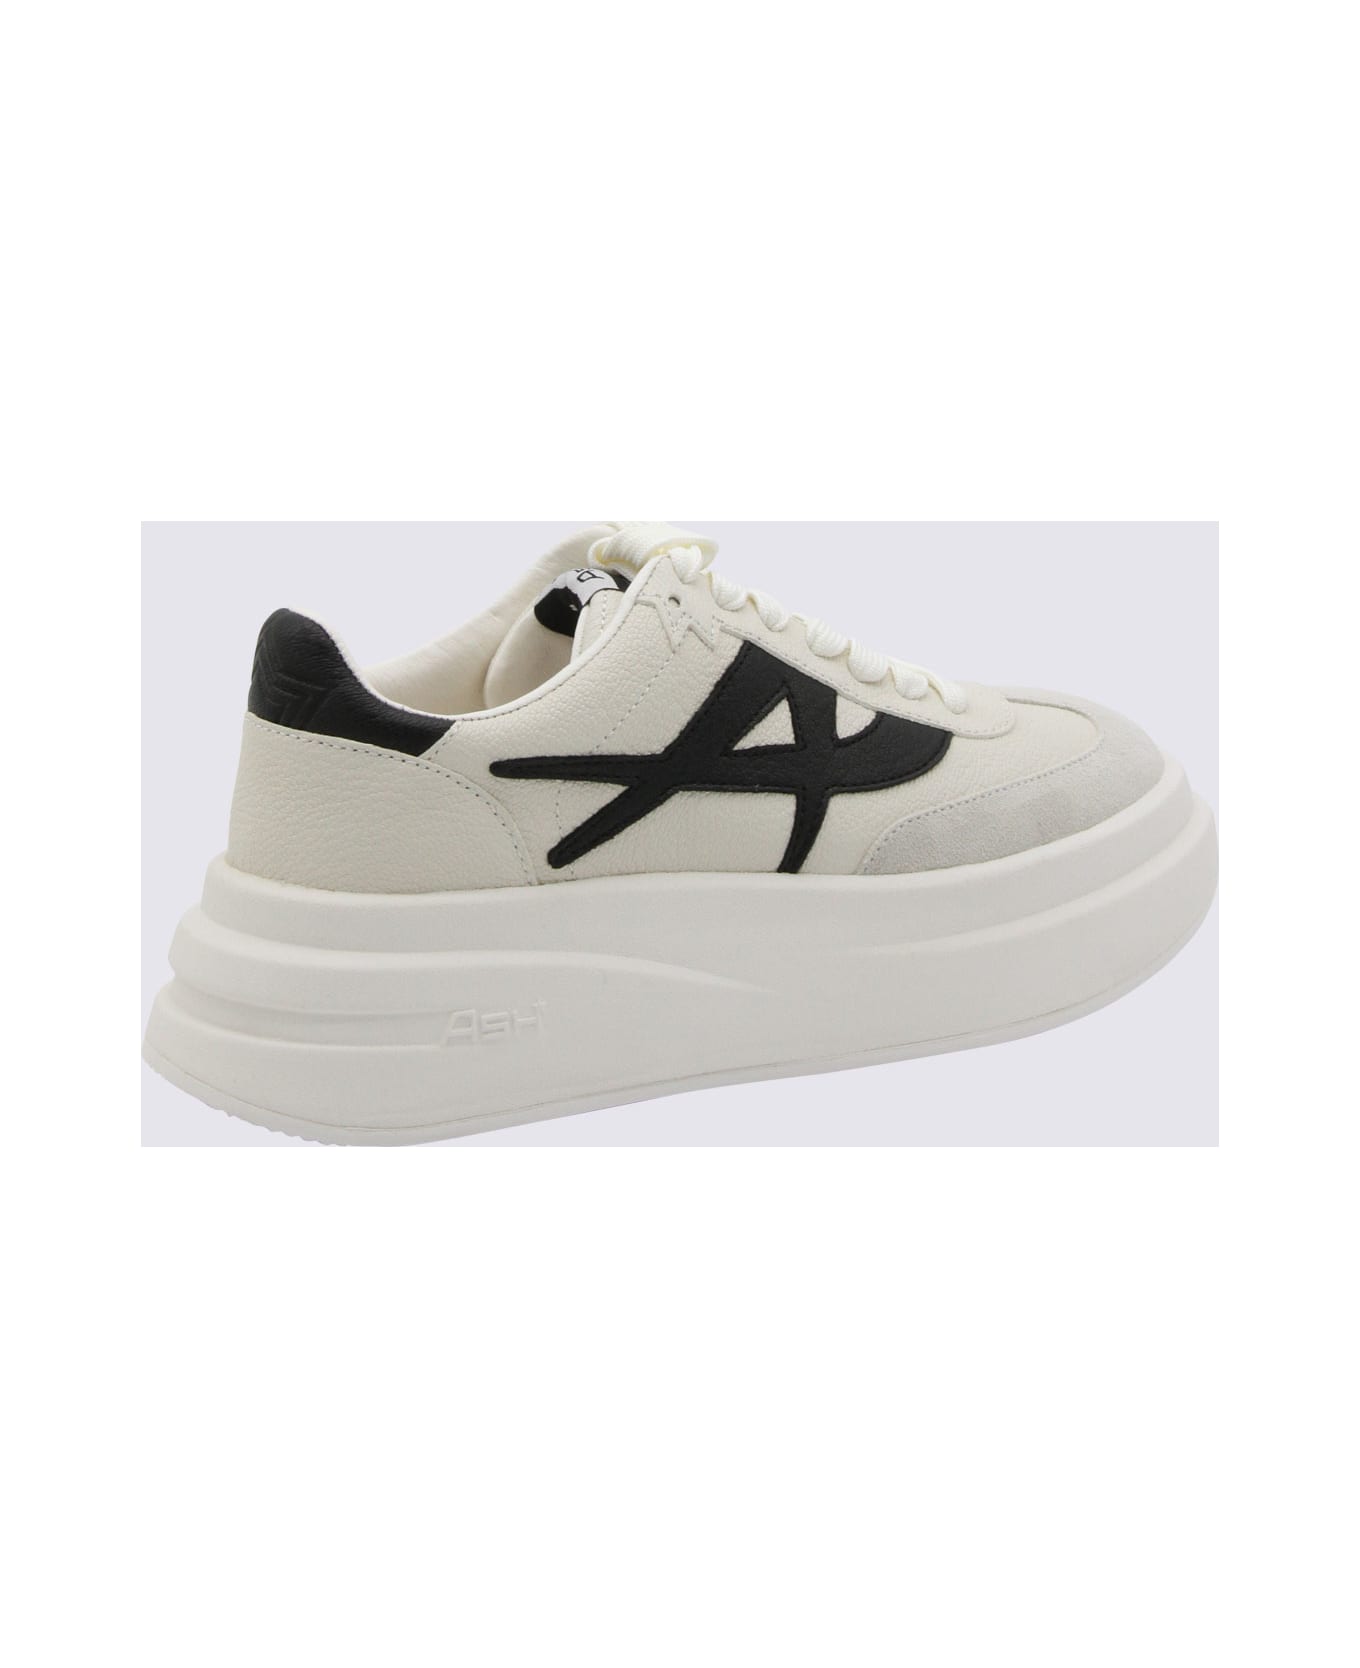 Ash White And Black Leather Sneakers - White